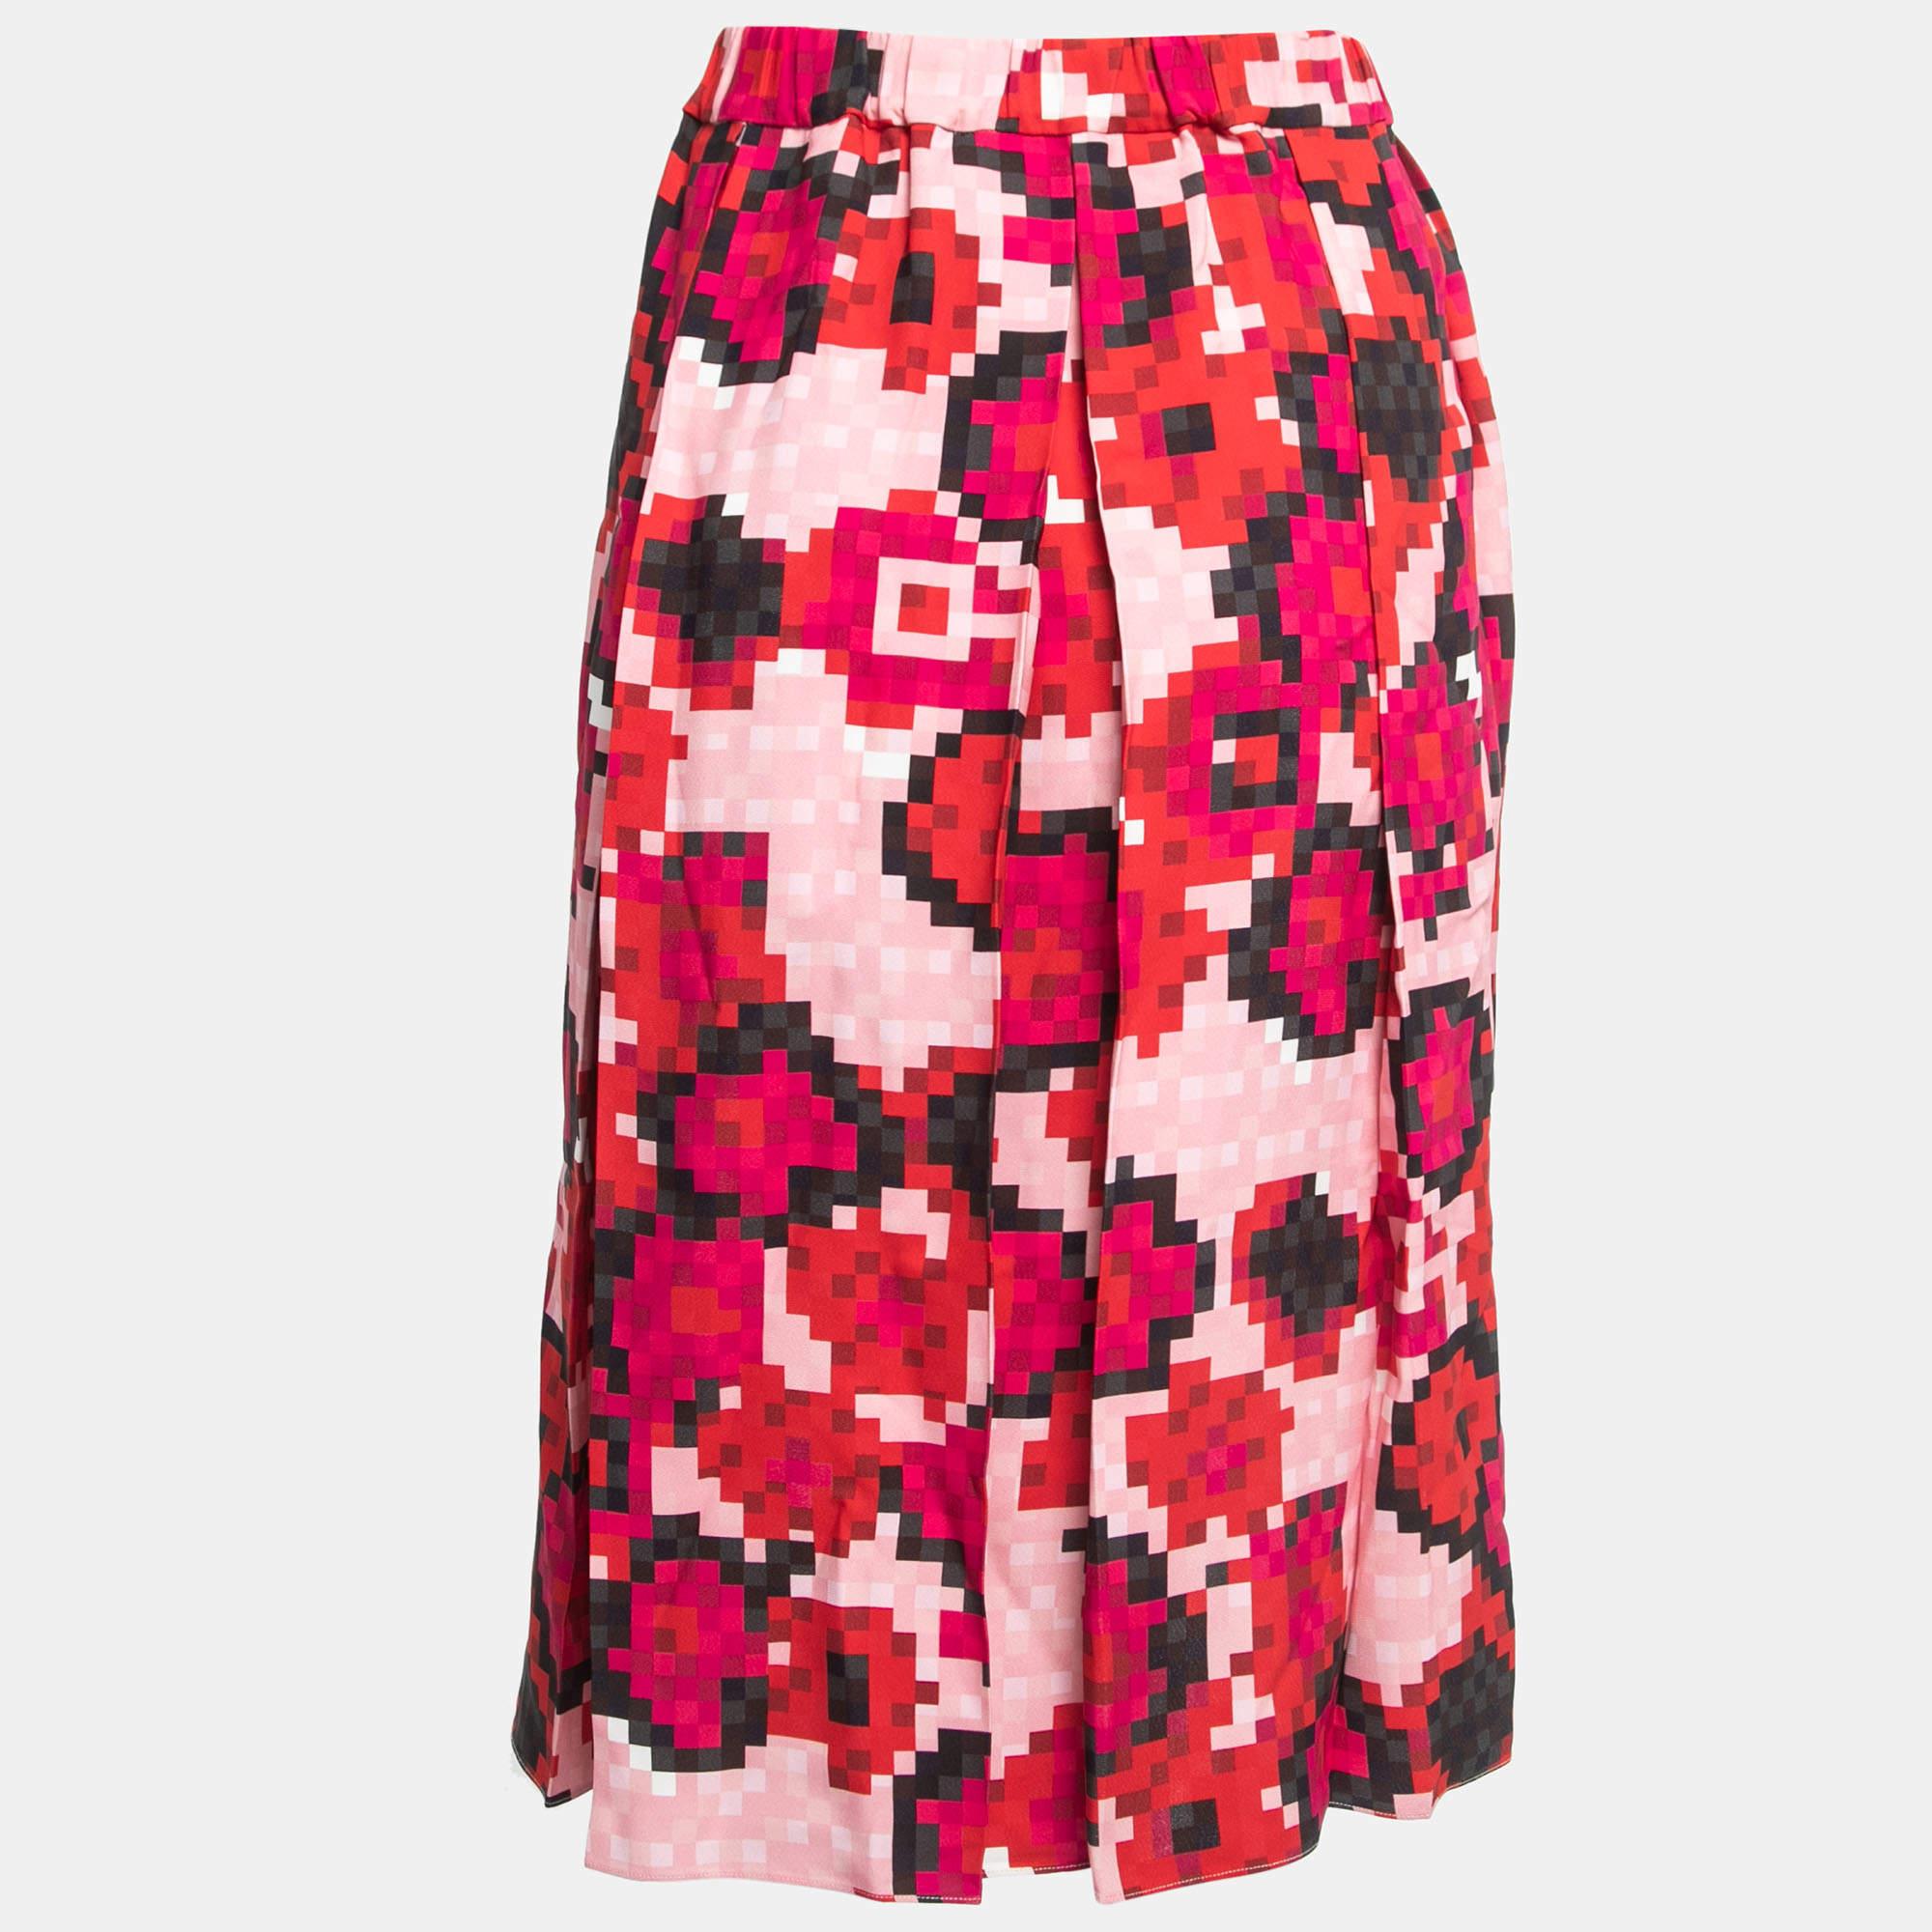 The Marni skirt is a vibrant and elegant piece of fashion. Made from high-quality crepe fabric, it features a striking digital print in shades of pink, creating a visually captivating design. The skirt is pleated for added texture and movement, with